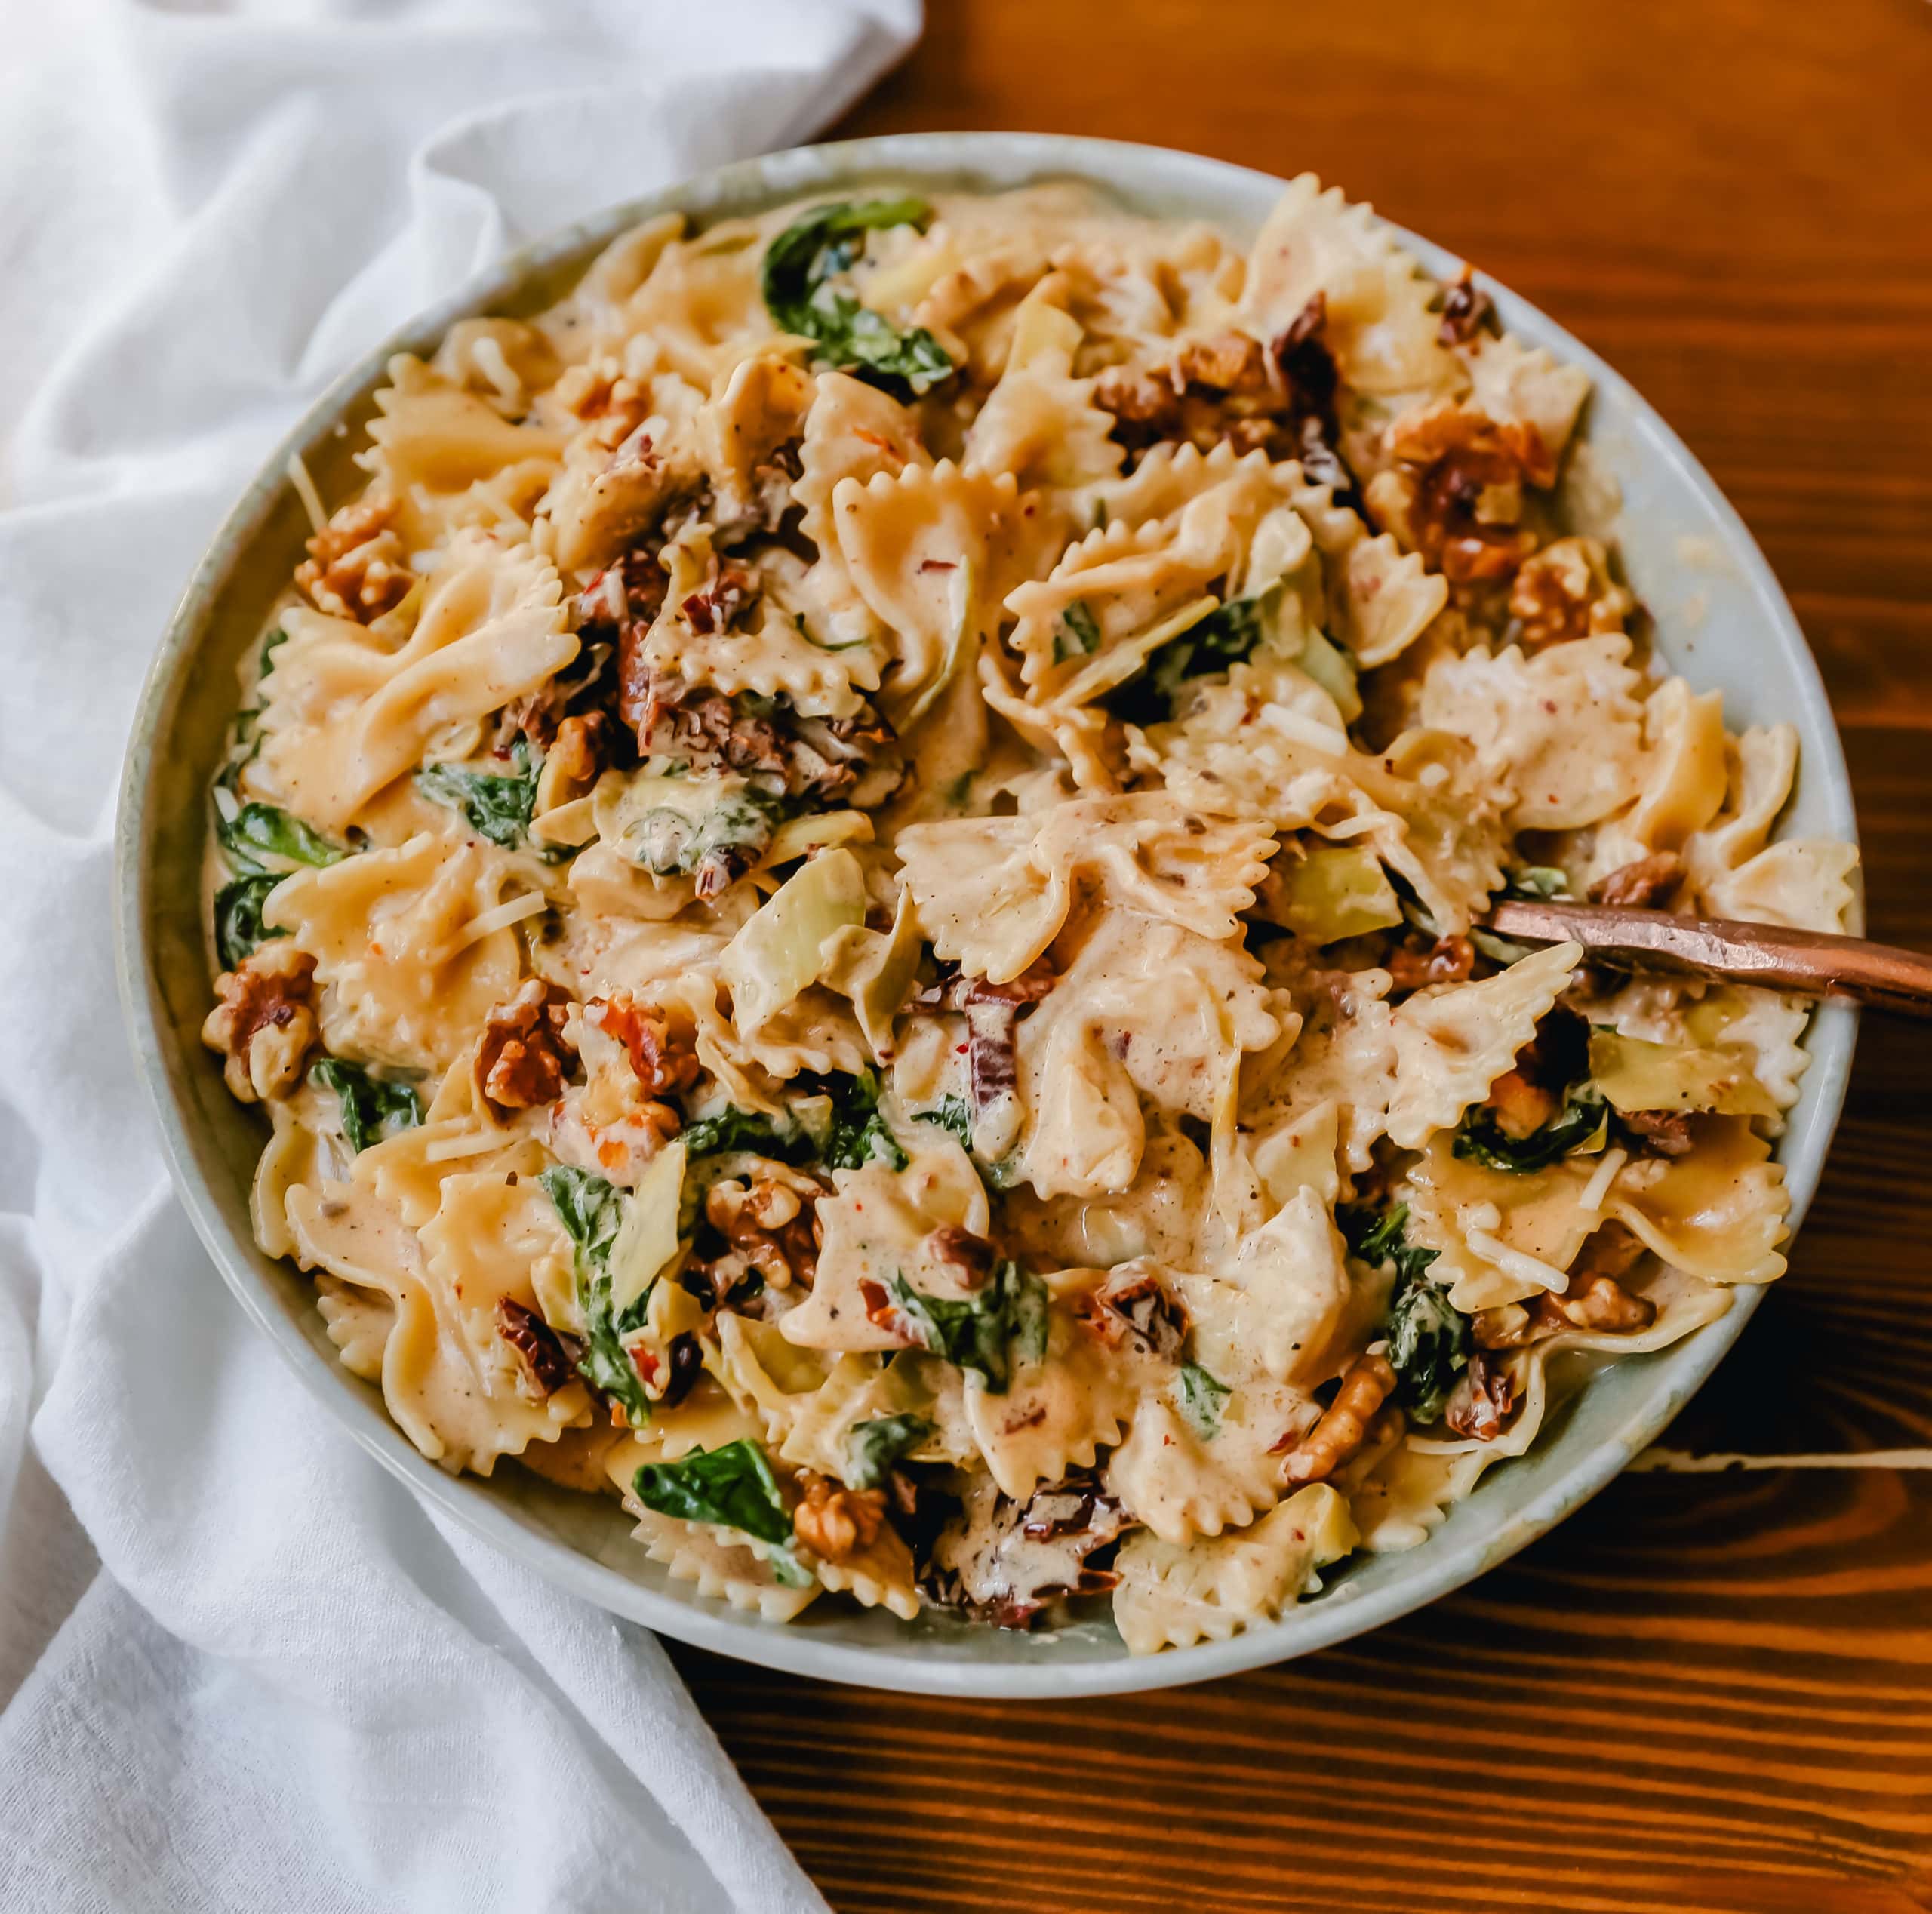 Creamy Bowtie Pasta with Sundried Tomatoes Bowtie Pasta tossed with a garlic sundried tomato cream sauce with artichoke hearts and parmesan cheese and crunchy toasted walnuts. A quick 20-minute weeknight meal. #pasta #dinner